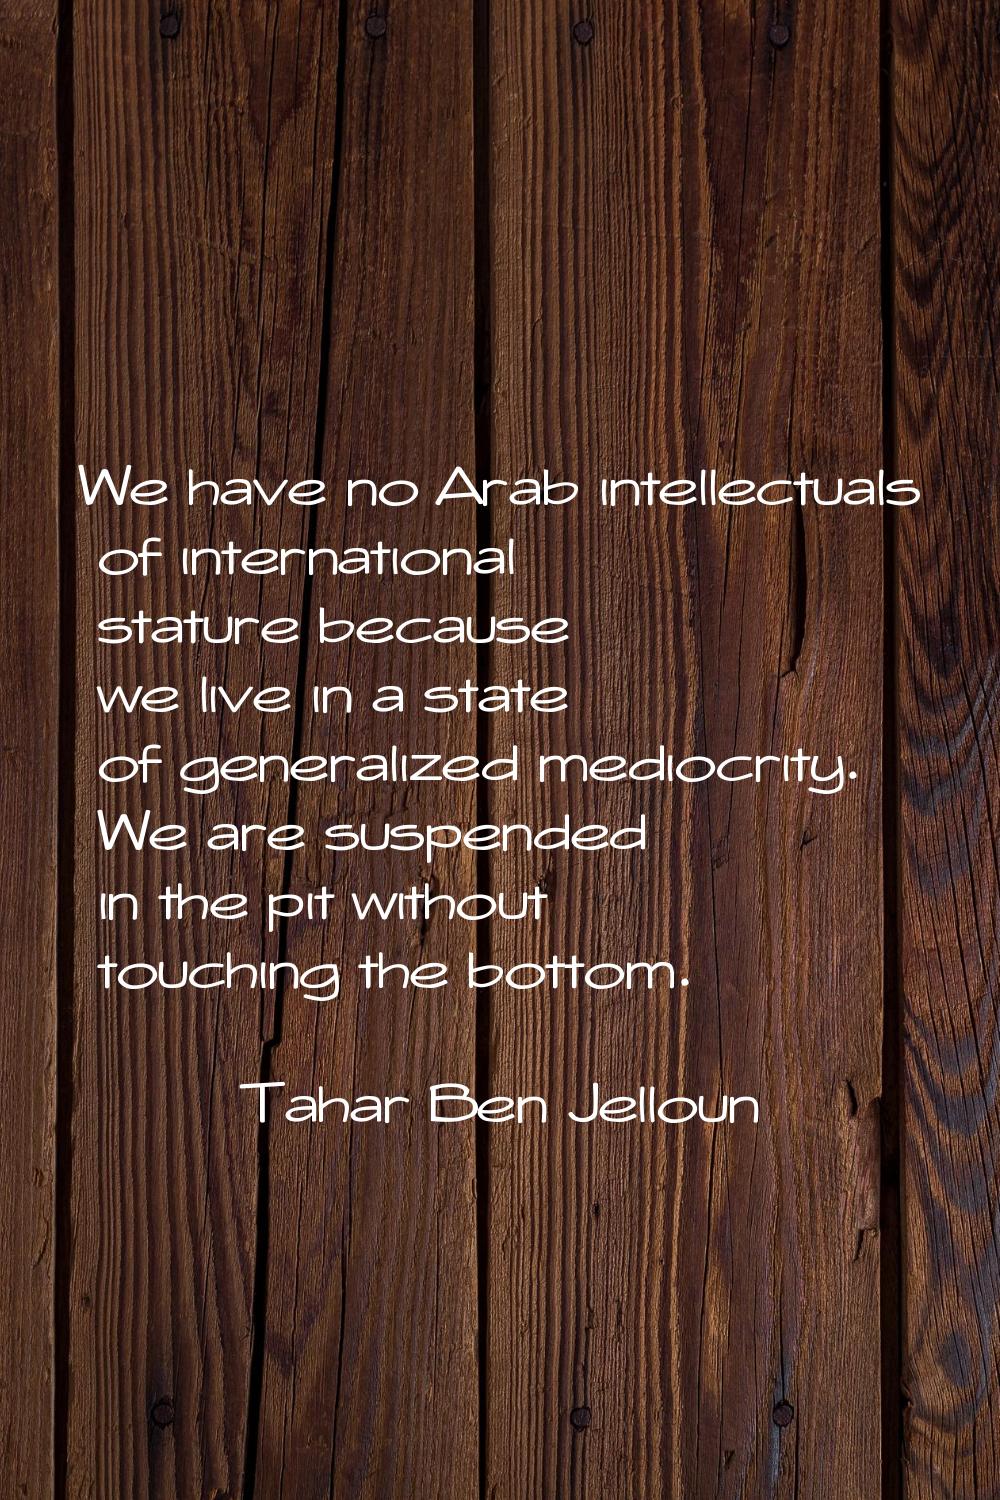 We have no Arab intellectuals of international stature because we live in a state of generalized me